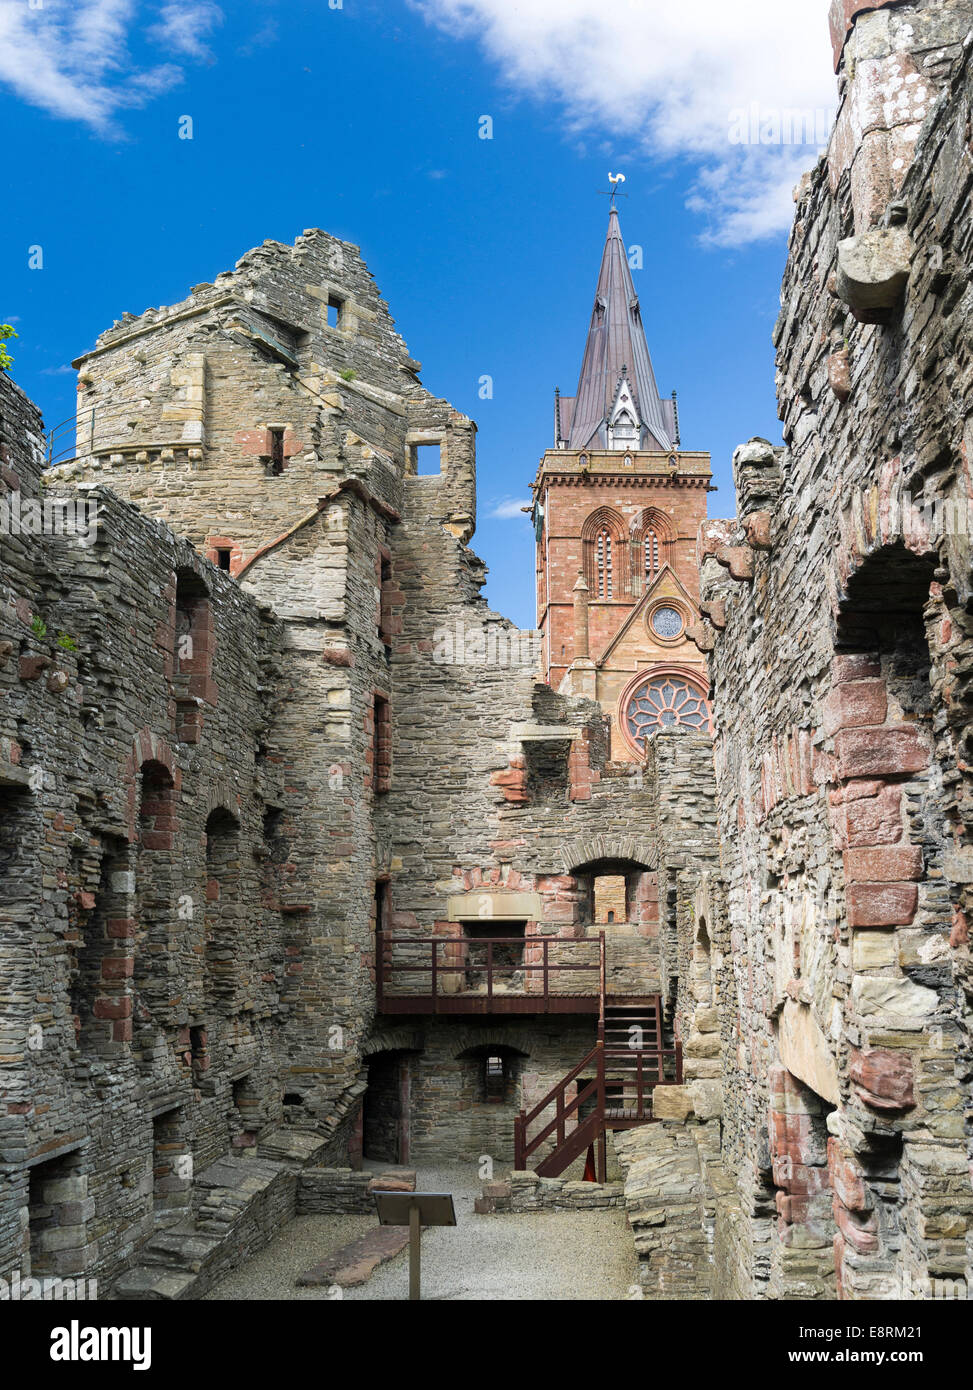 Bishop's Palace, built in the 12th century, St. Magnus Cathedral in the background, Kirkwall, Orkney islands, Scotland. Stock Photo